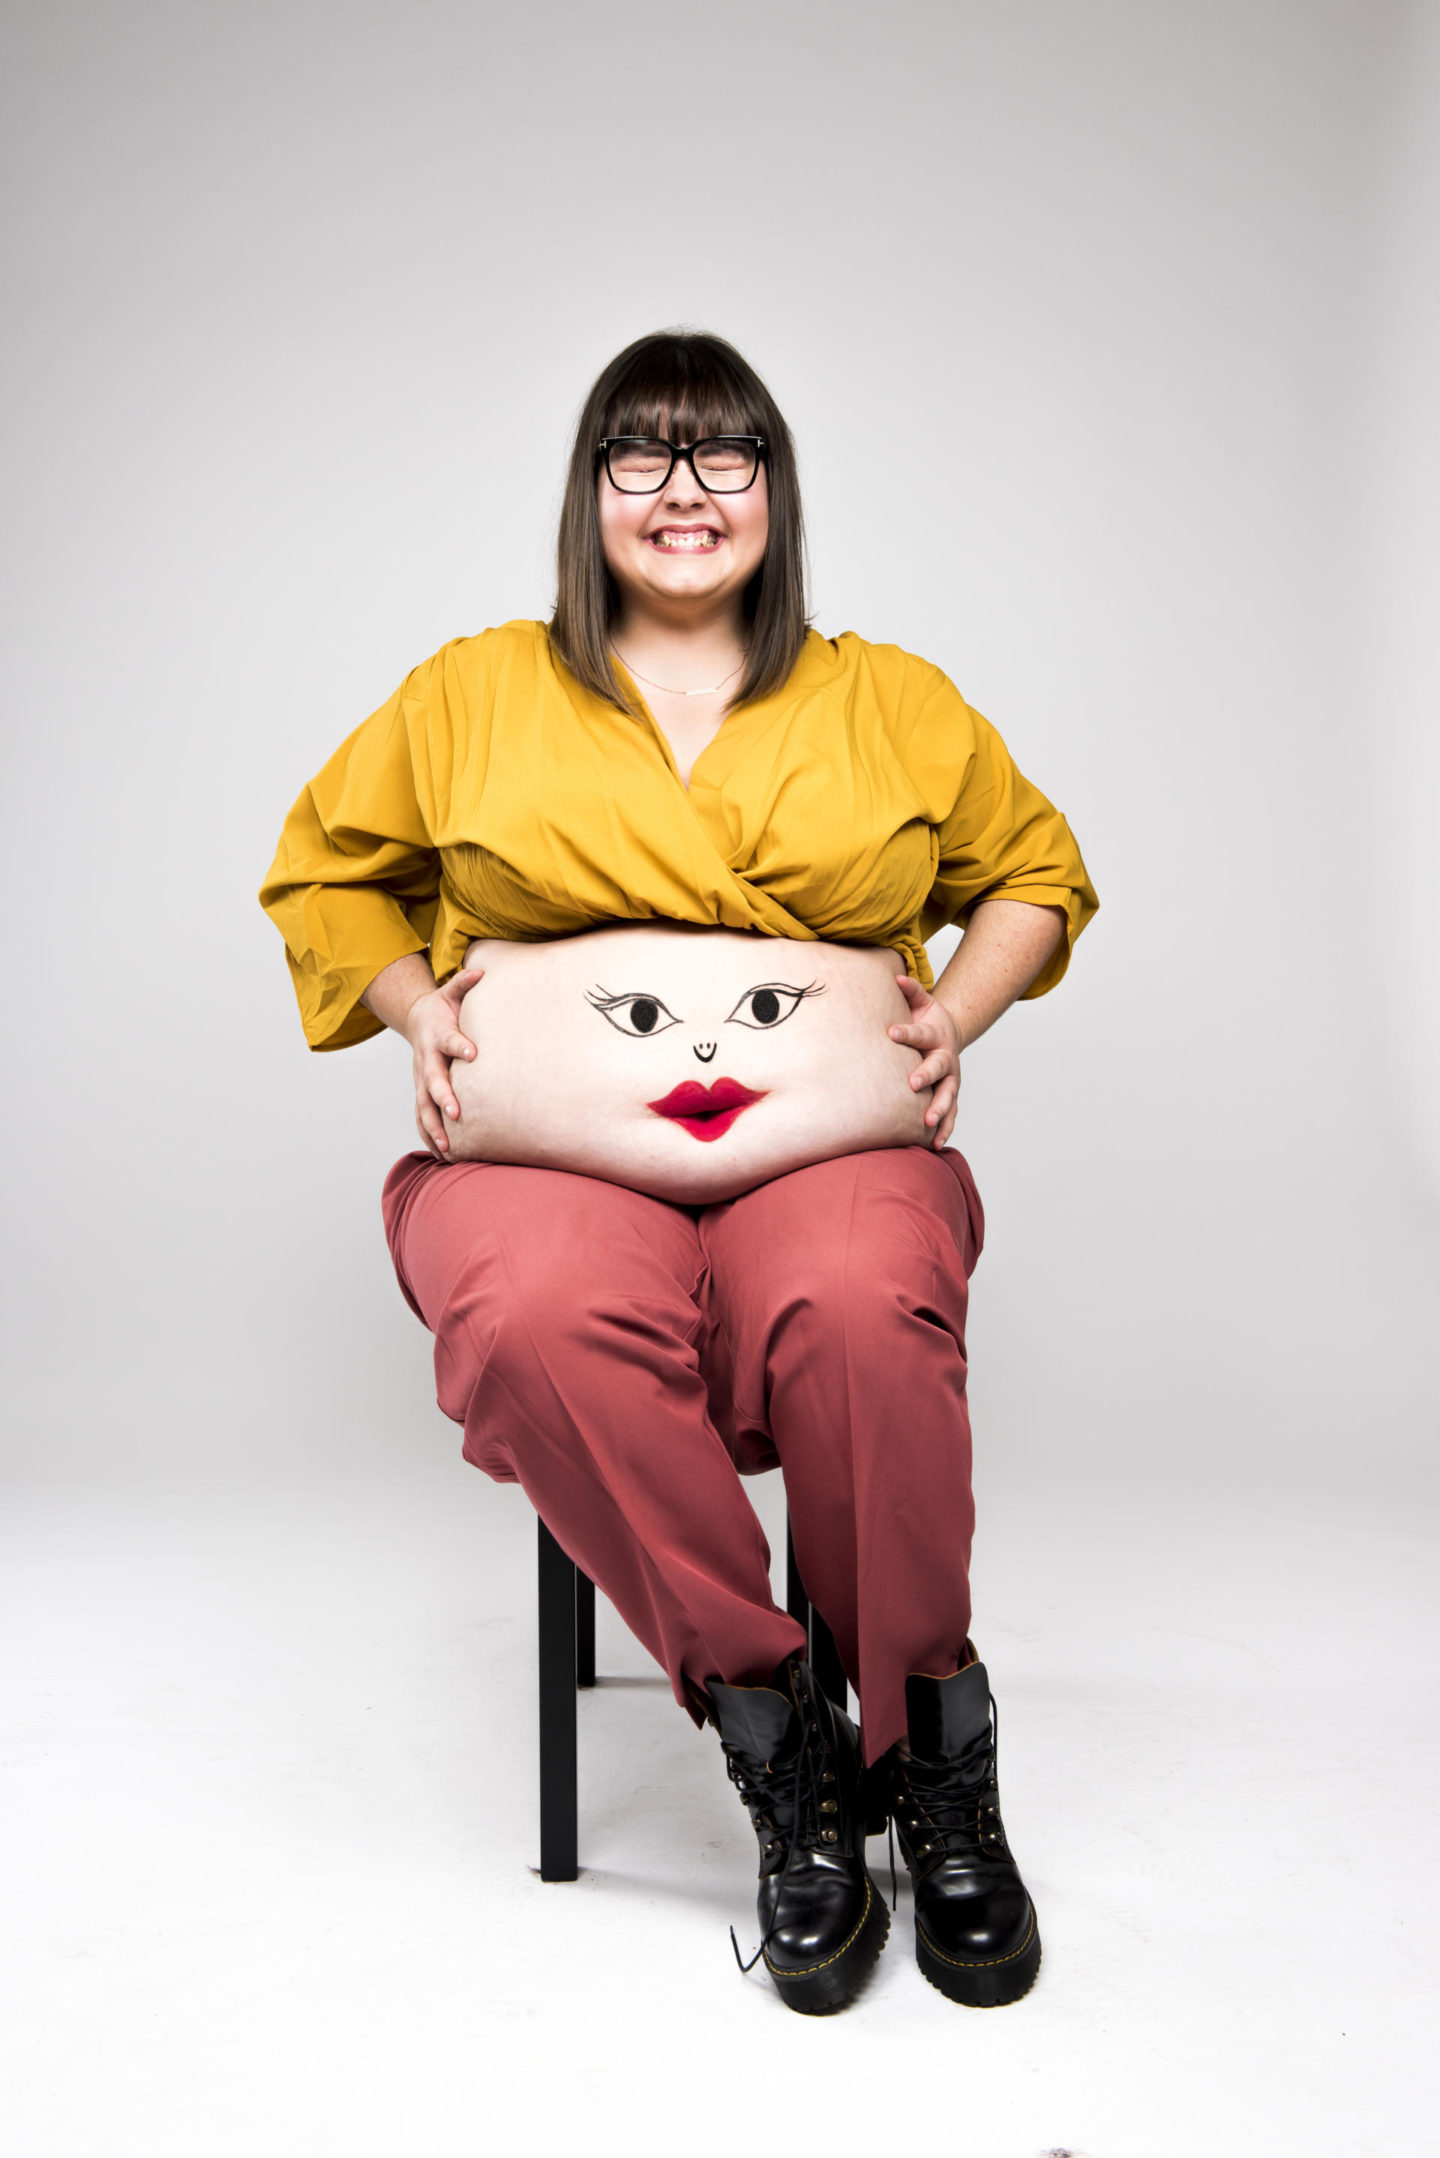 SOFIE HAGEN: ‘BODY POSITIVITY WASN’T DESIGNED TO MAKE YOU LOVE YOUR BODY’